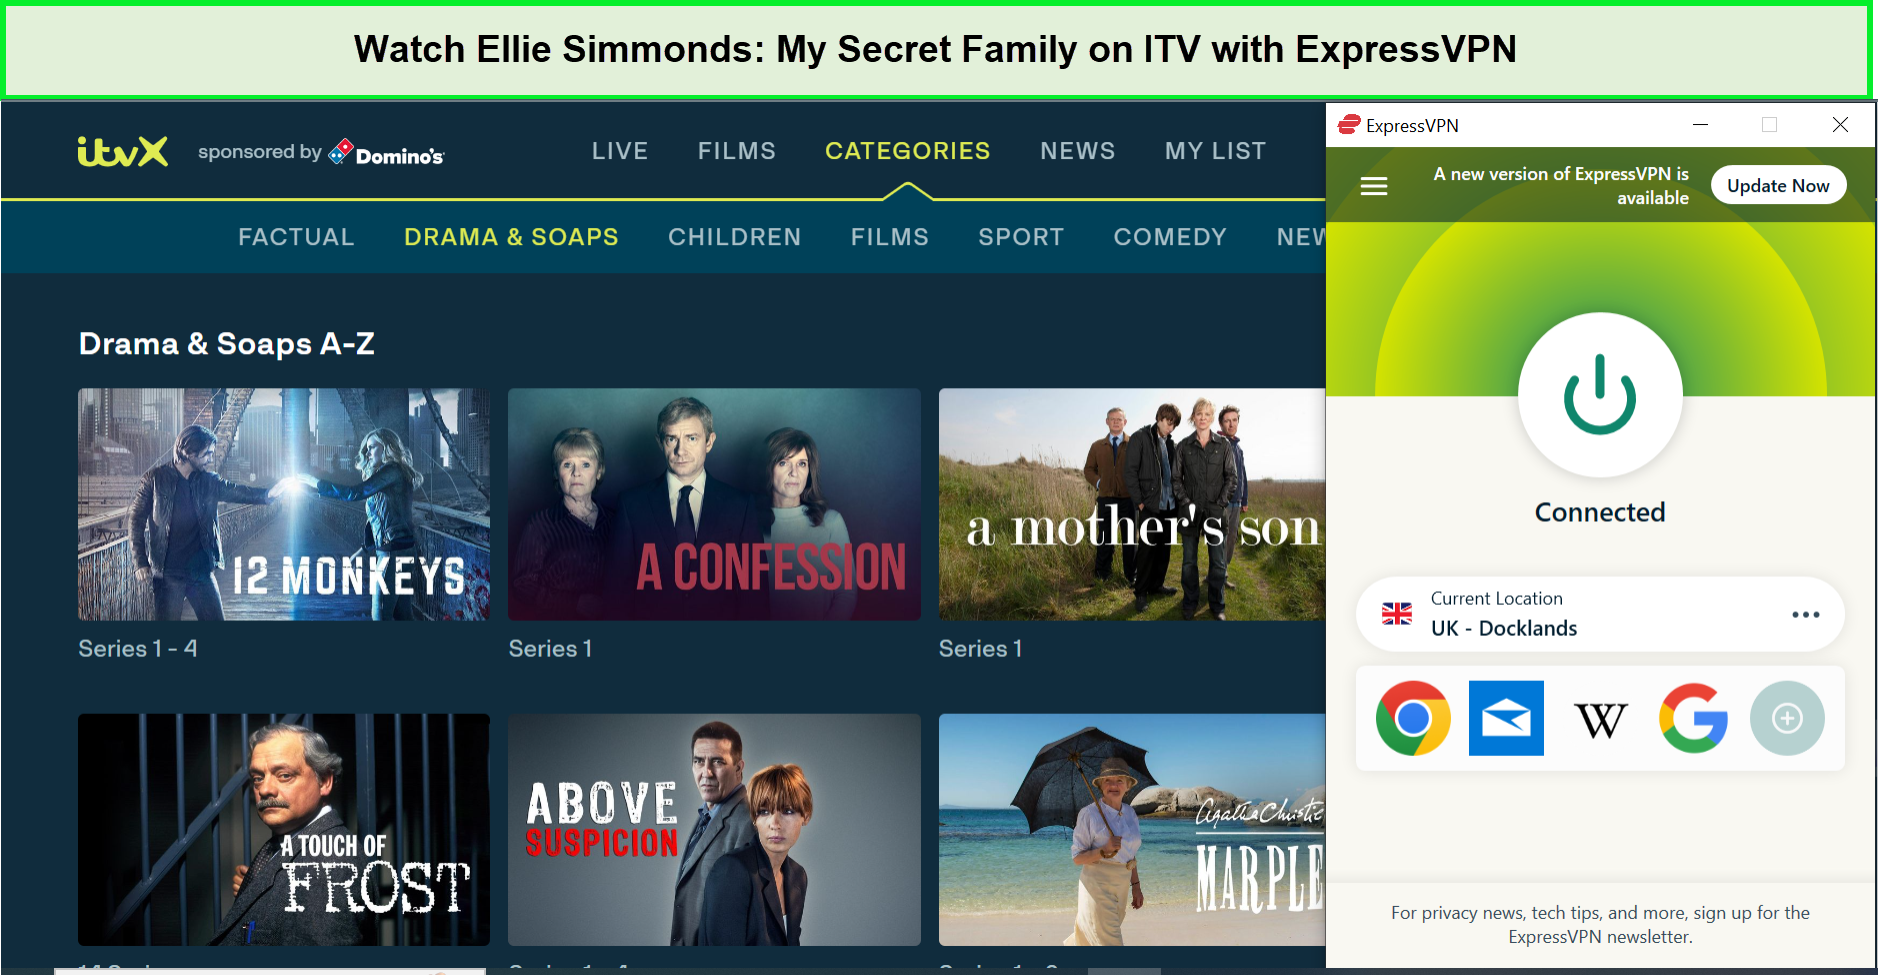 Watch-Ellie-Simmonds-My-Secret-Family-in-France-on-ITV-with-ExpressVPN